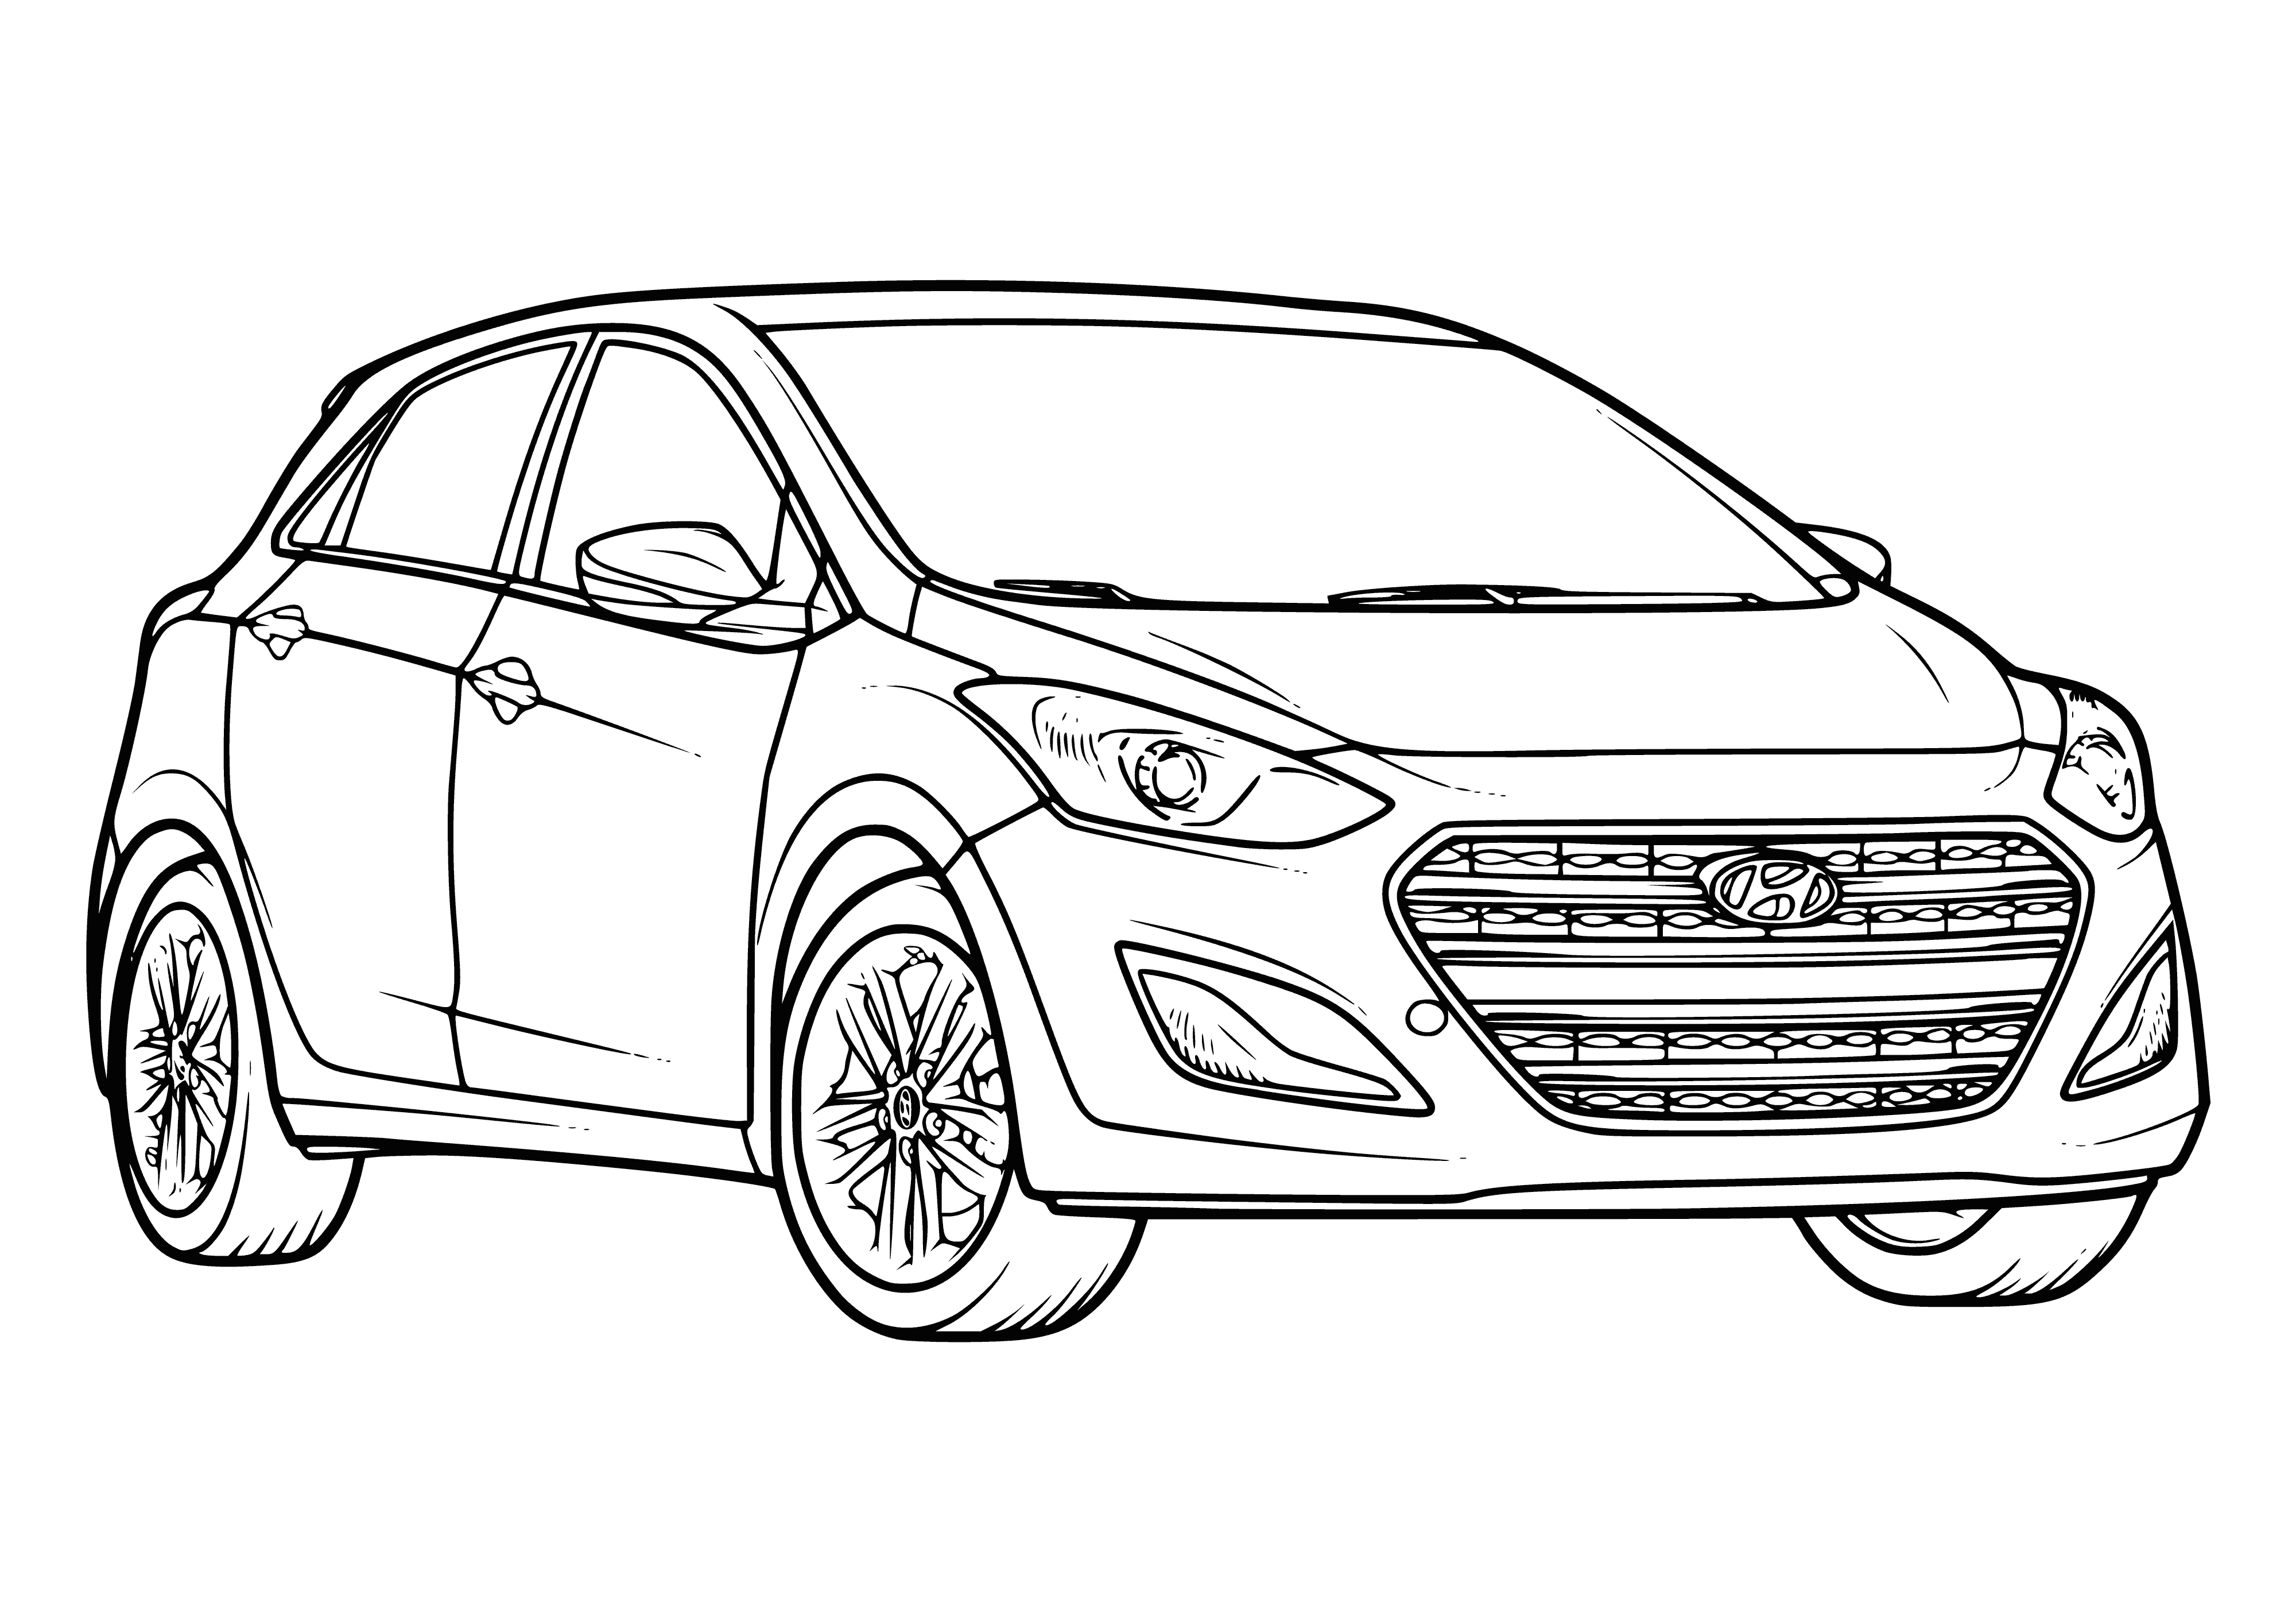 coloring page: Hyundai cars have roomy interiors, sleek and stylish exteriors, and come in a variety of colors.